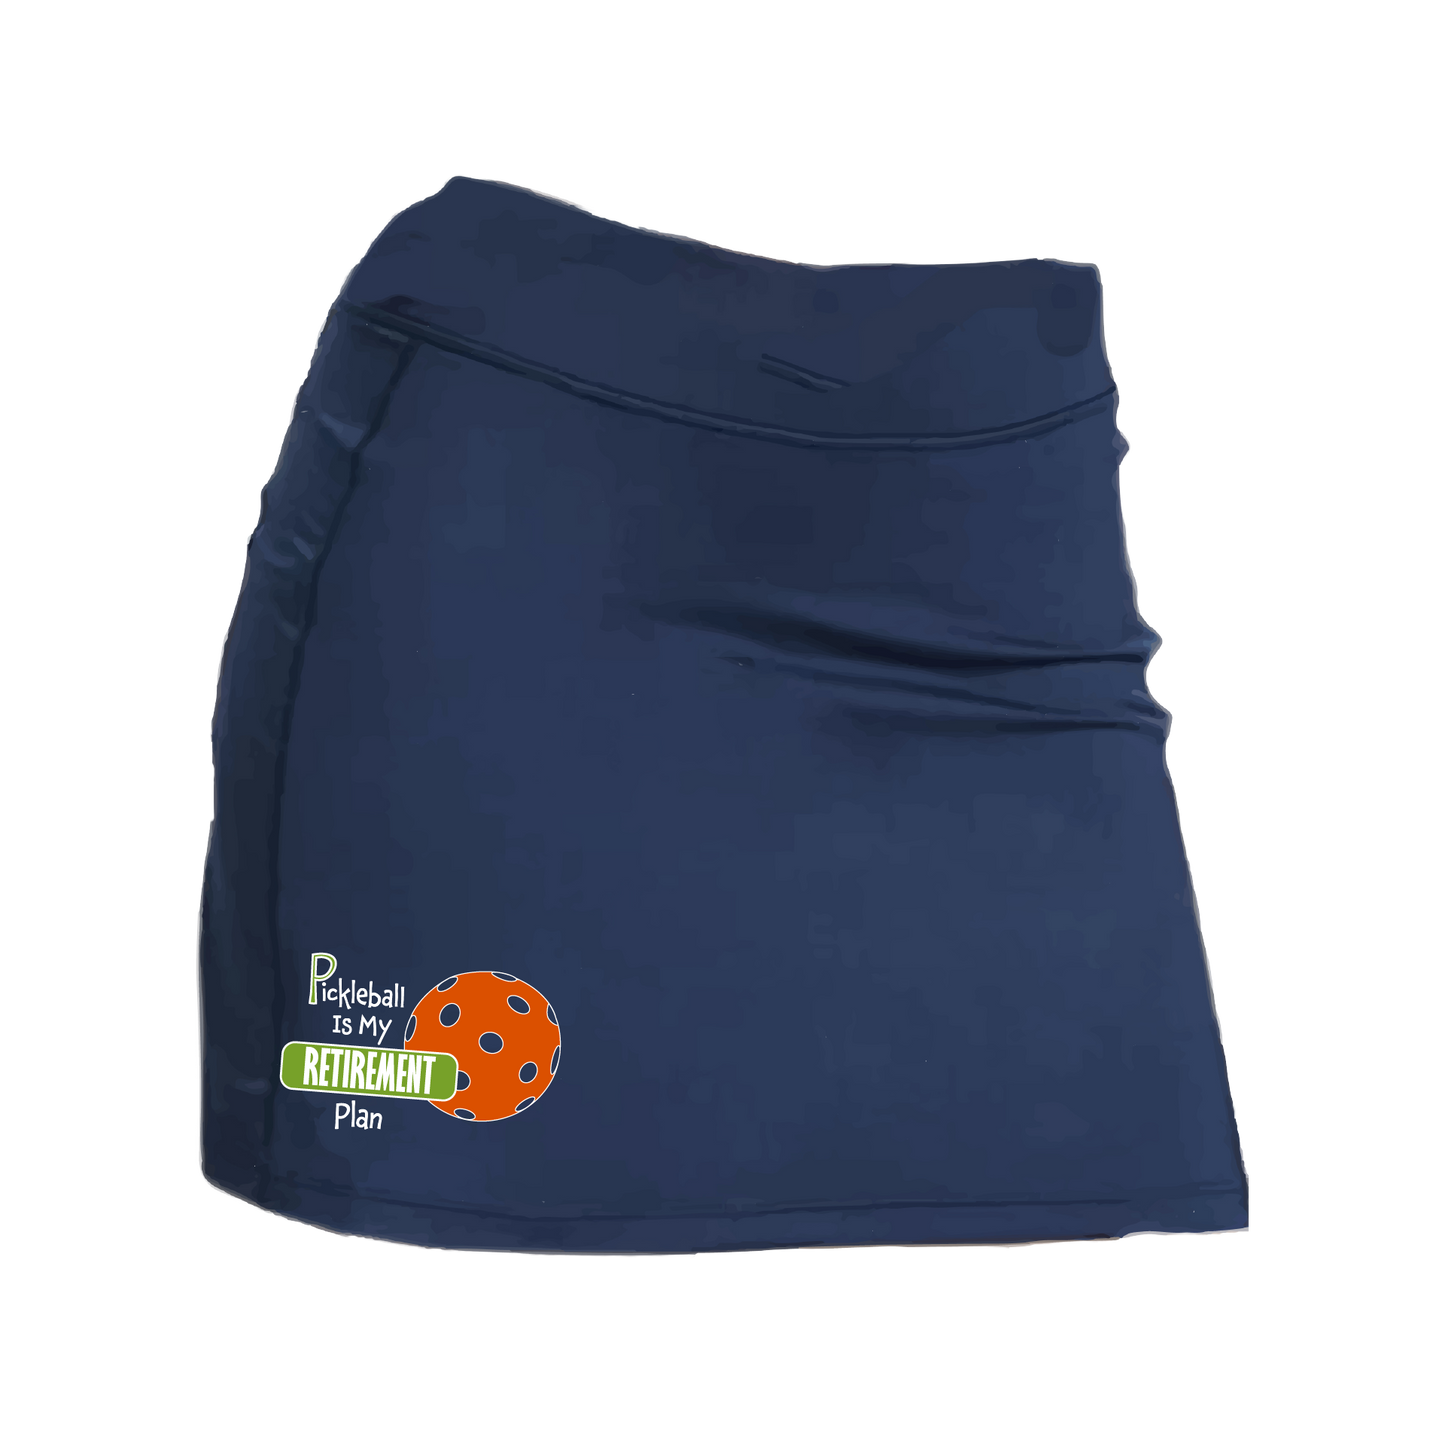 Pickleball Skort Design: Pickleball is my Retirement Plan  Women’s core active jersey-knit skort comes with built-in shorts made out of a poly-spandex blend that will keep your legs from rubbing together, without which often results in painful chafing. You can also feel secure knowing that no matter how strenuous the exercise, the skort will remain in place (it won’t ride up!). 